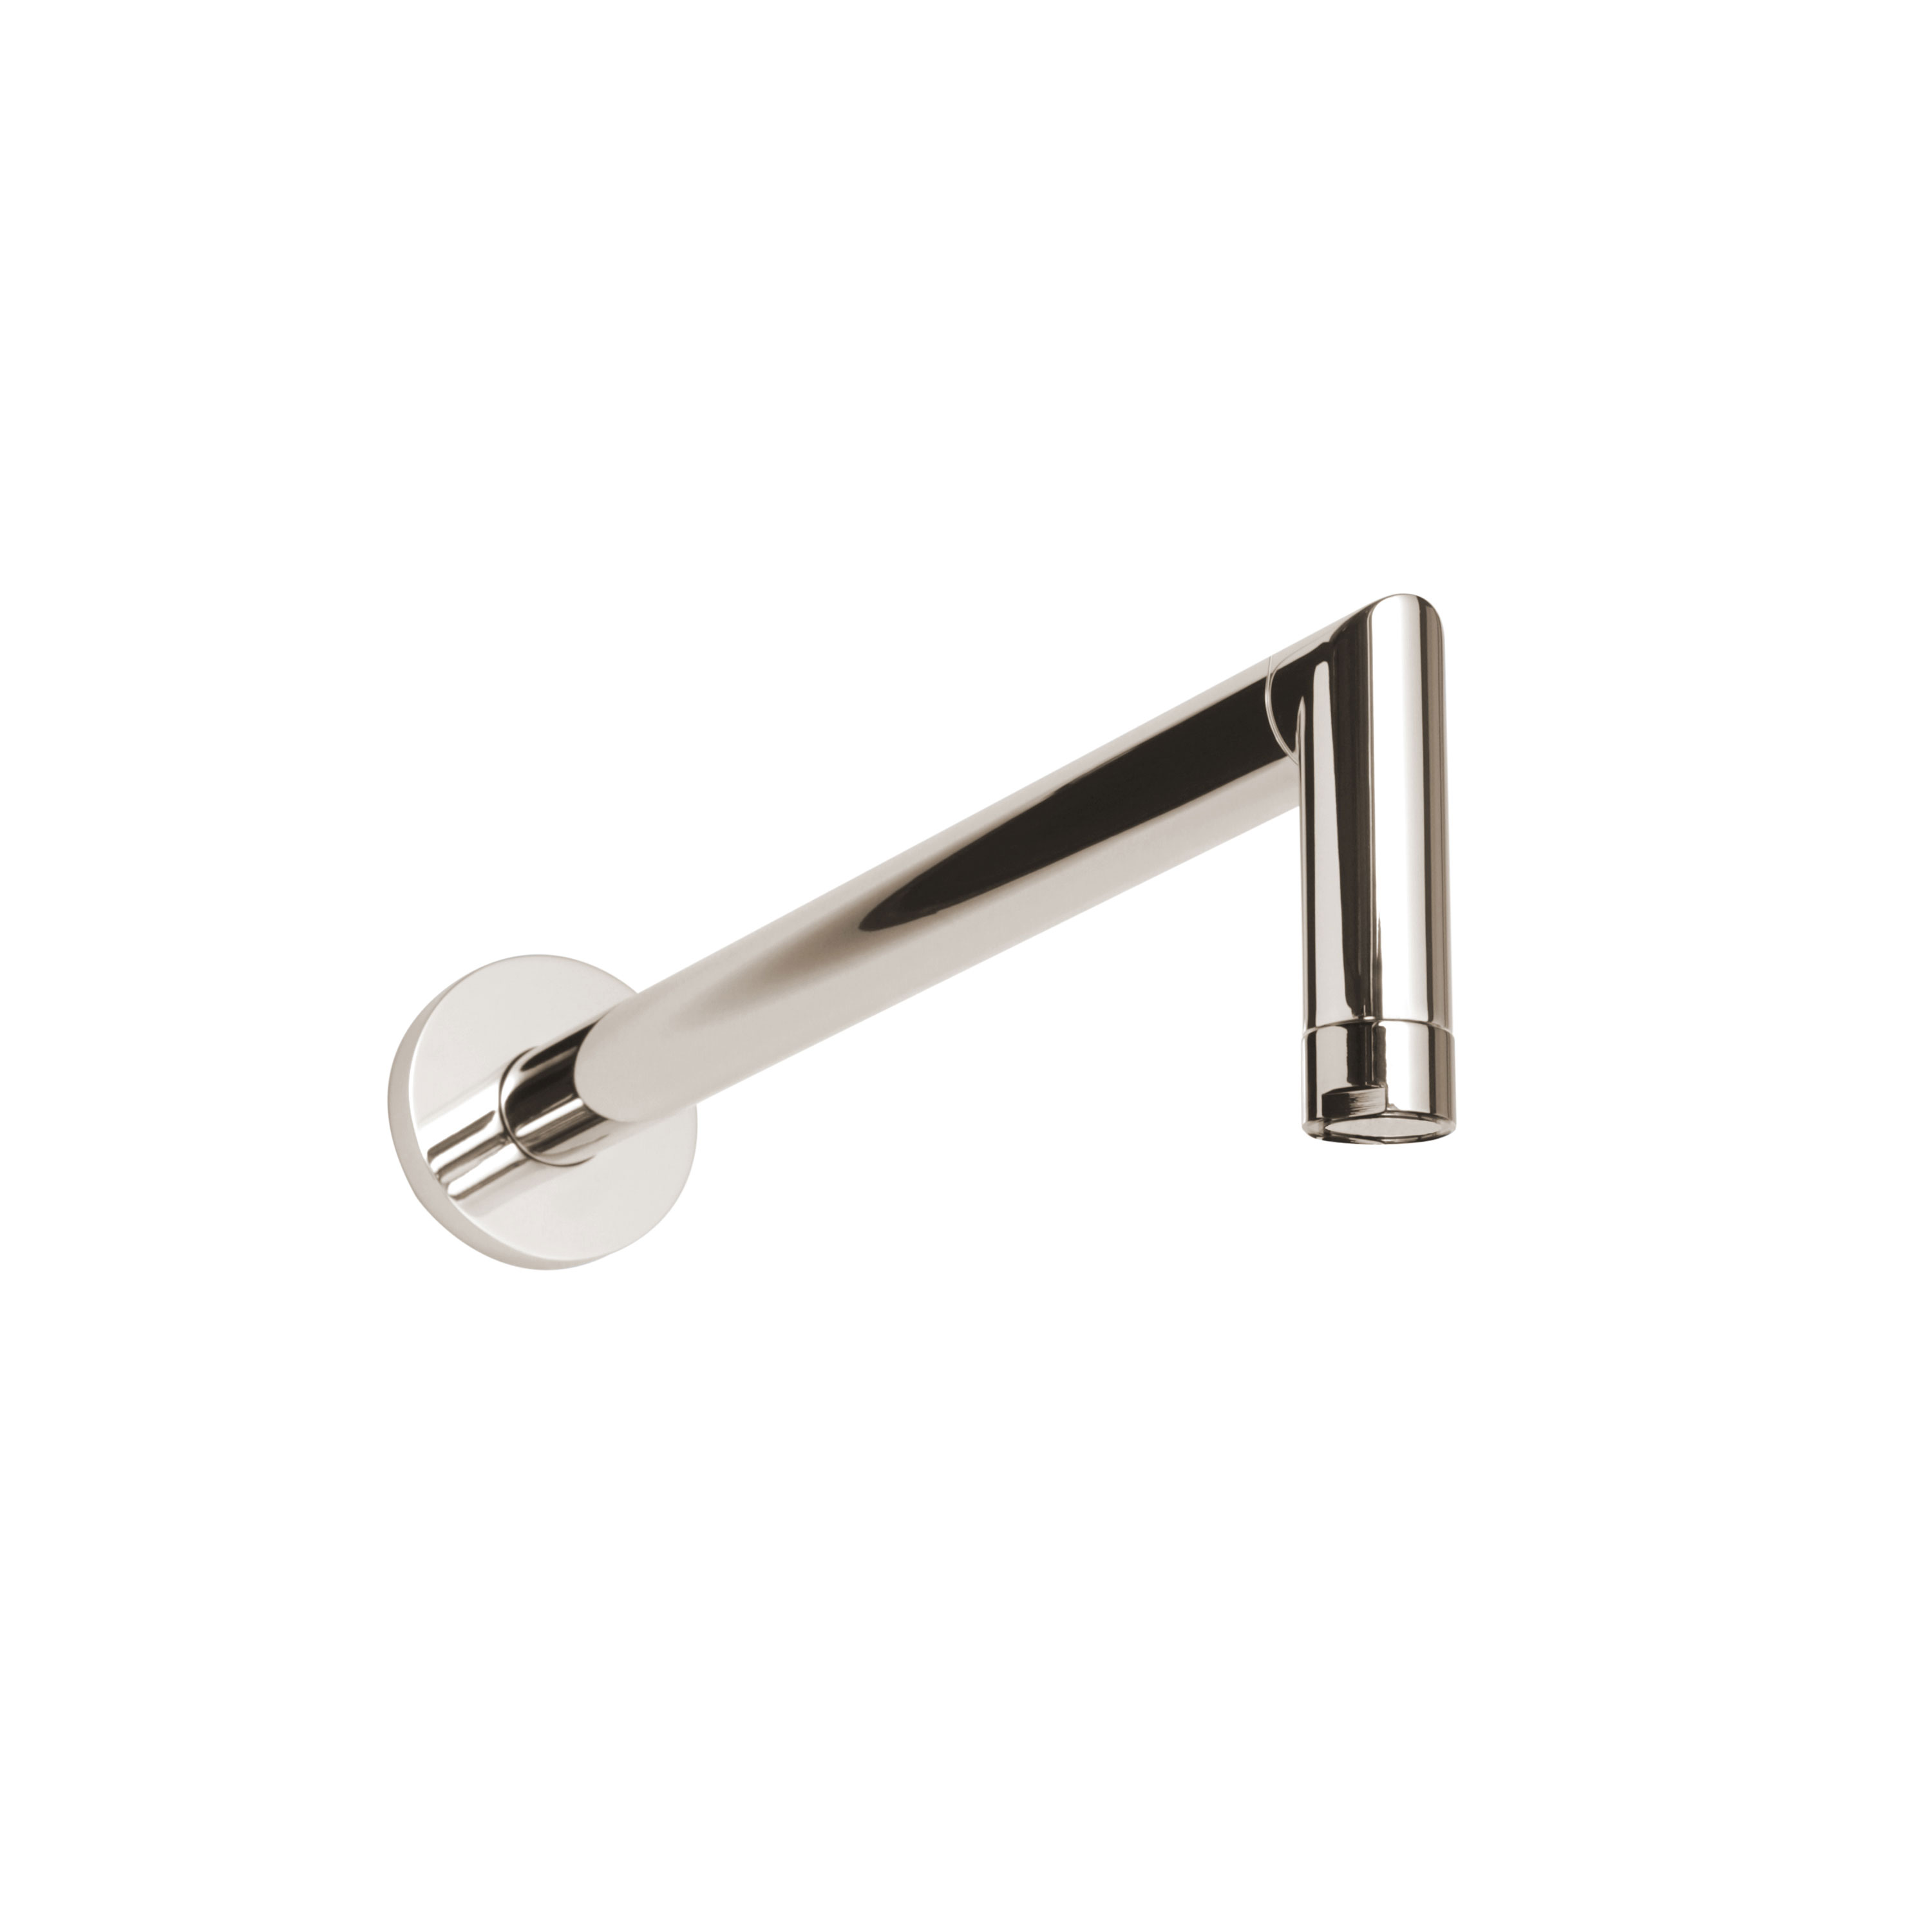 Thermasol 15-1000-PN 16" - 90 Degree Wall Shower Arm Round - Polished Nickel